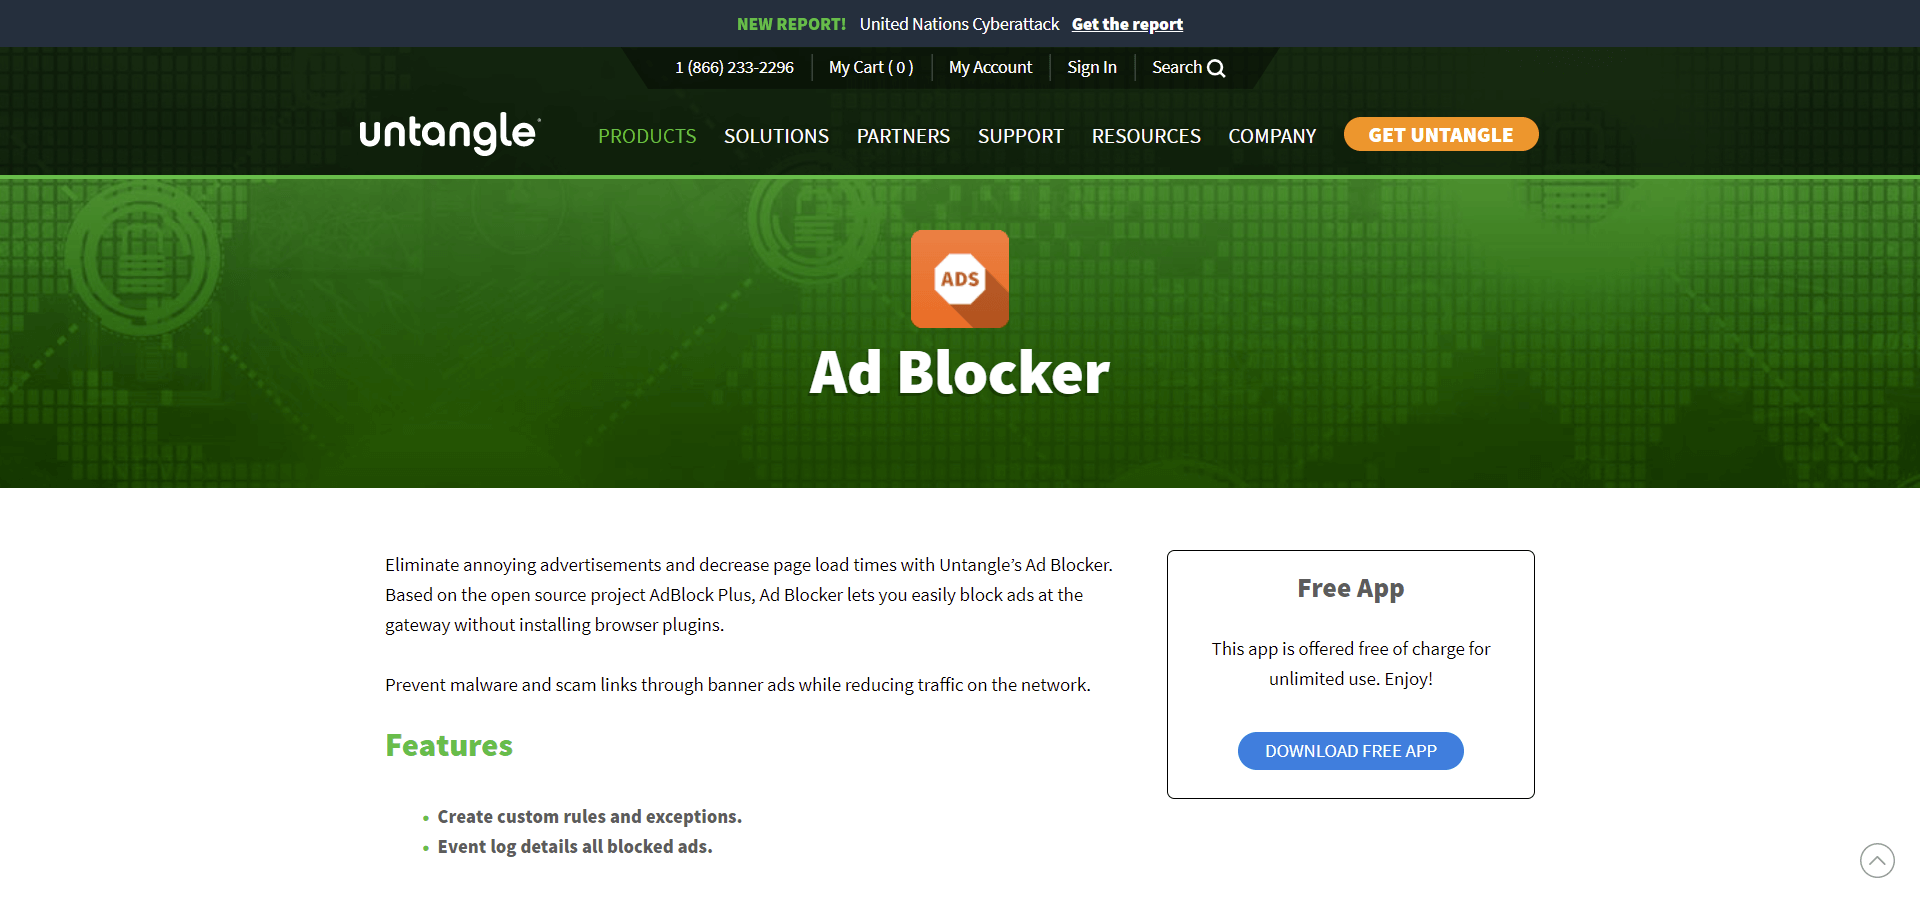 best ad blockers for chrome, best ad blockers, best free ad blockers, best ad blocker apps, best ad blockers for android, best ad blockers for safari, best ad blockers for firefox, best ad blockers for ios, best ad blockers for iphone, best free ad blockers for chrome, best ad blockers for ipad, best ad blockers for mac, best ad blockers for google chrome, best mobile ad blockers, best youtube ad blockers, best ad blocker extensions for chrome, SaaS Blog, All That SaaS